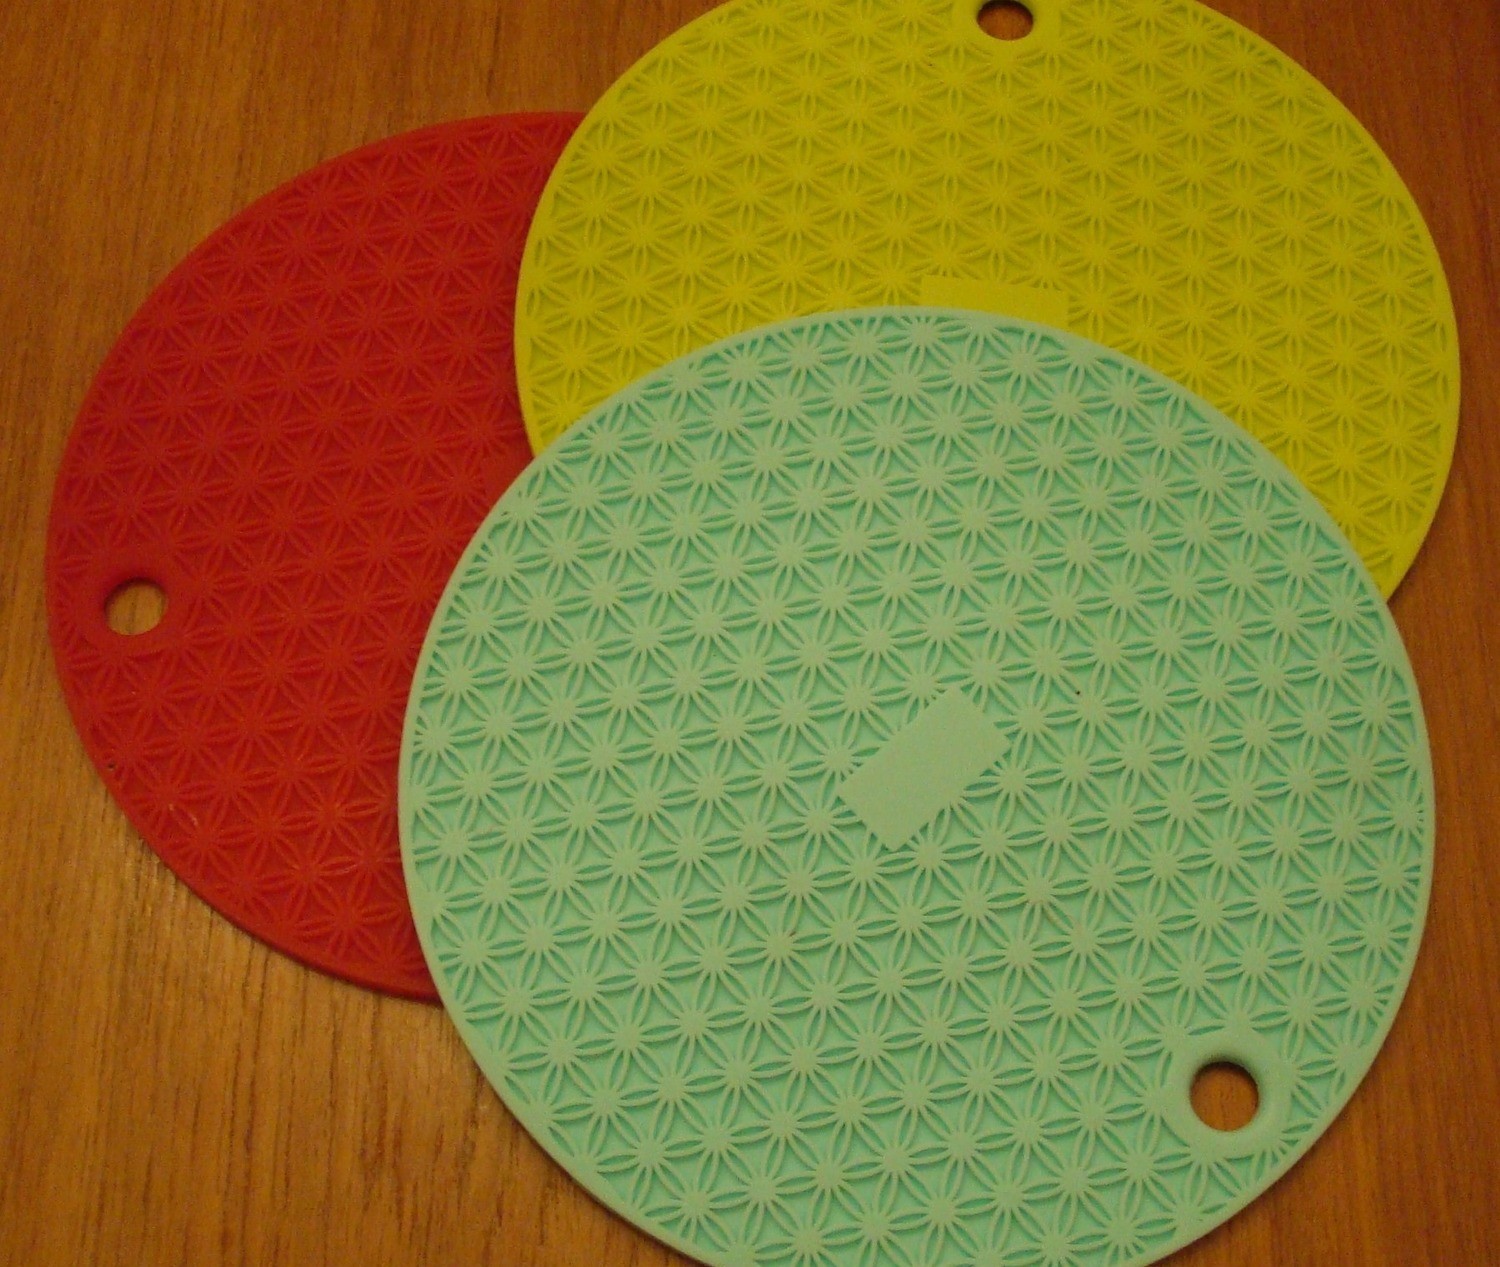 Silicone Hot Pads